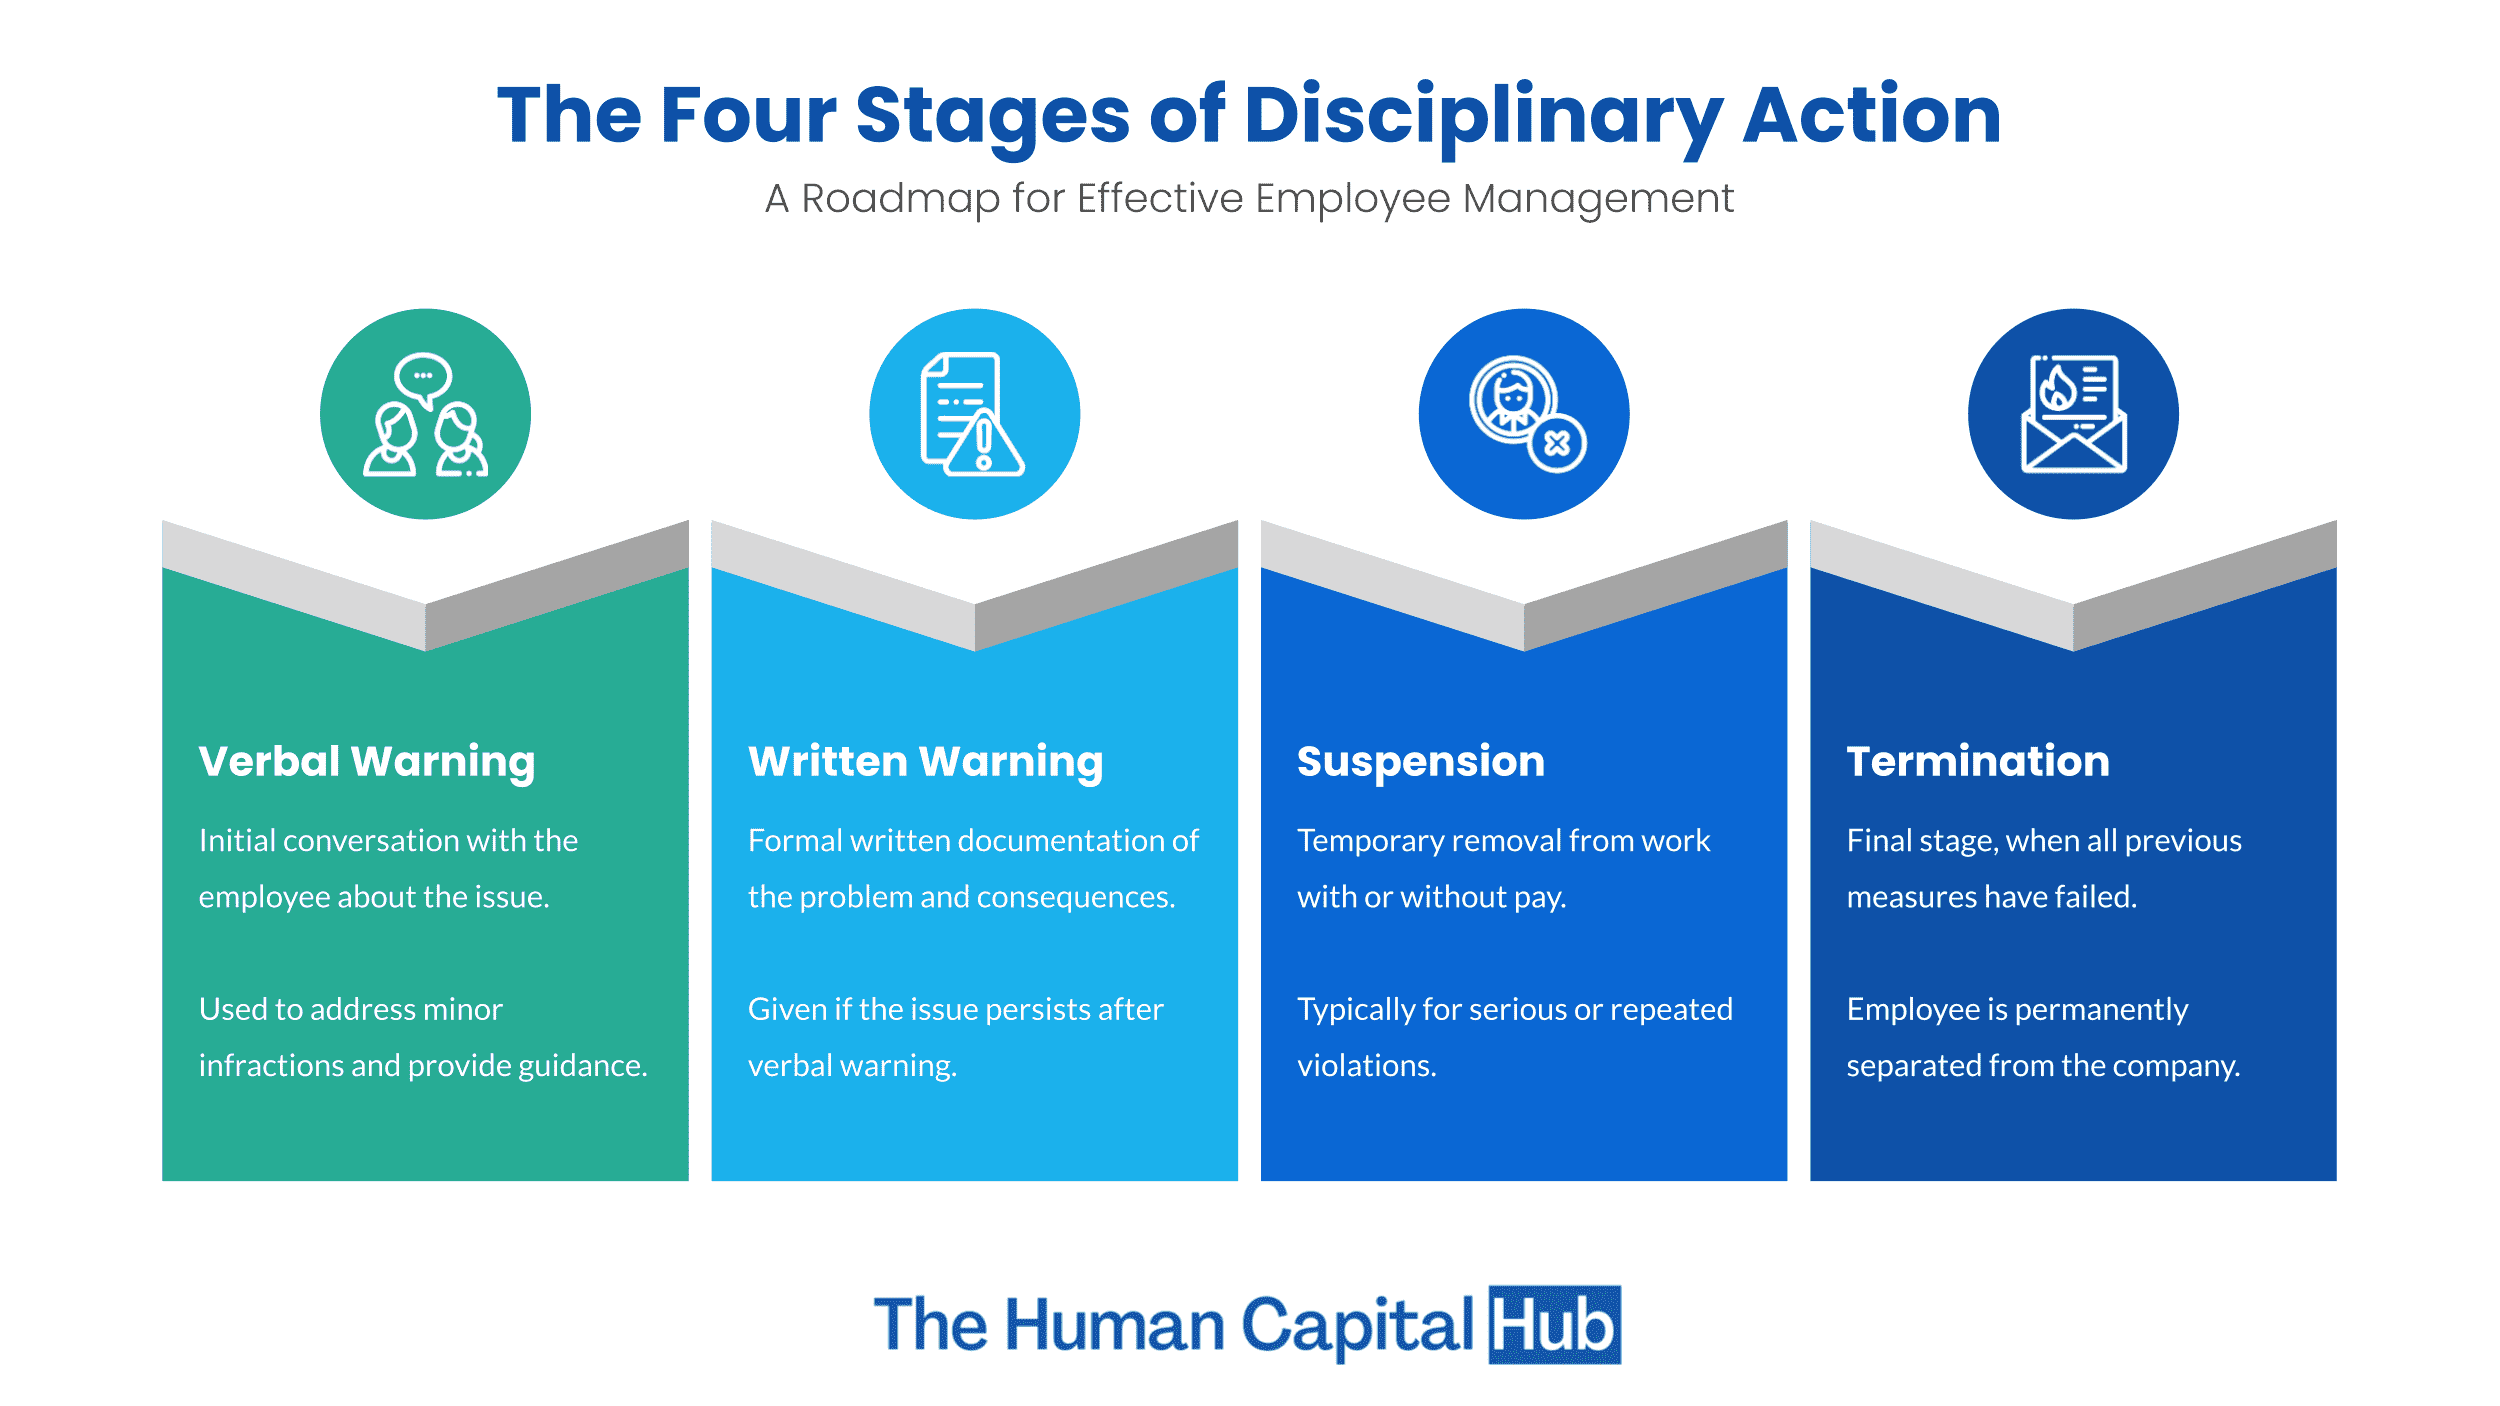 The Four Stages of Disciplinary Action